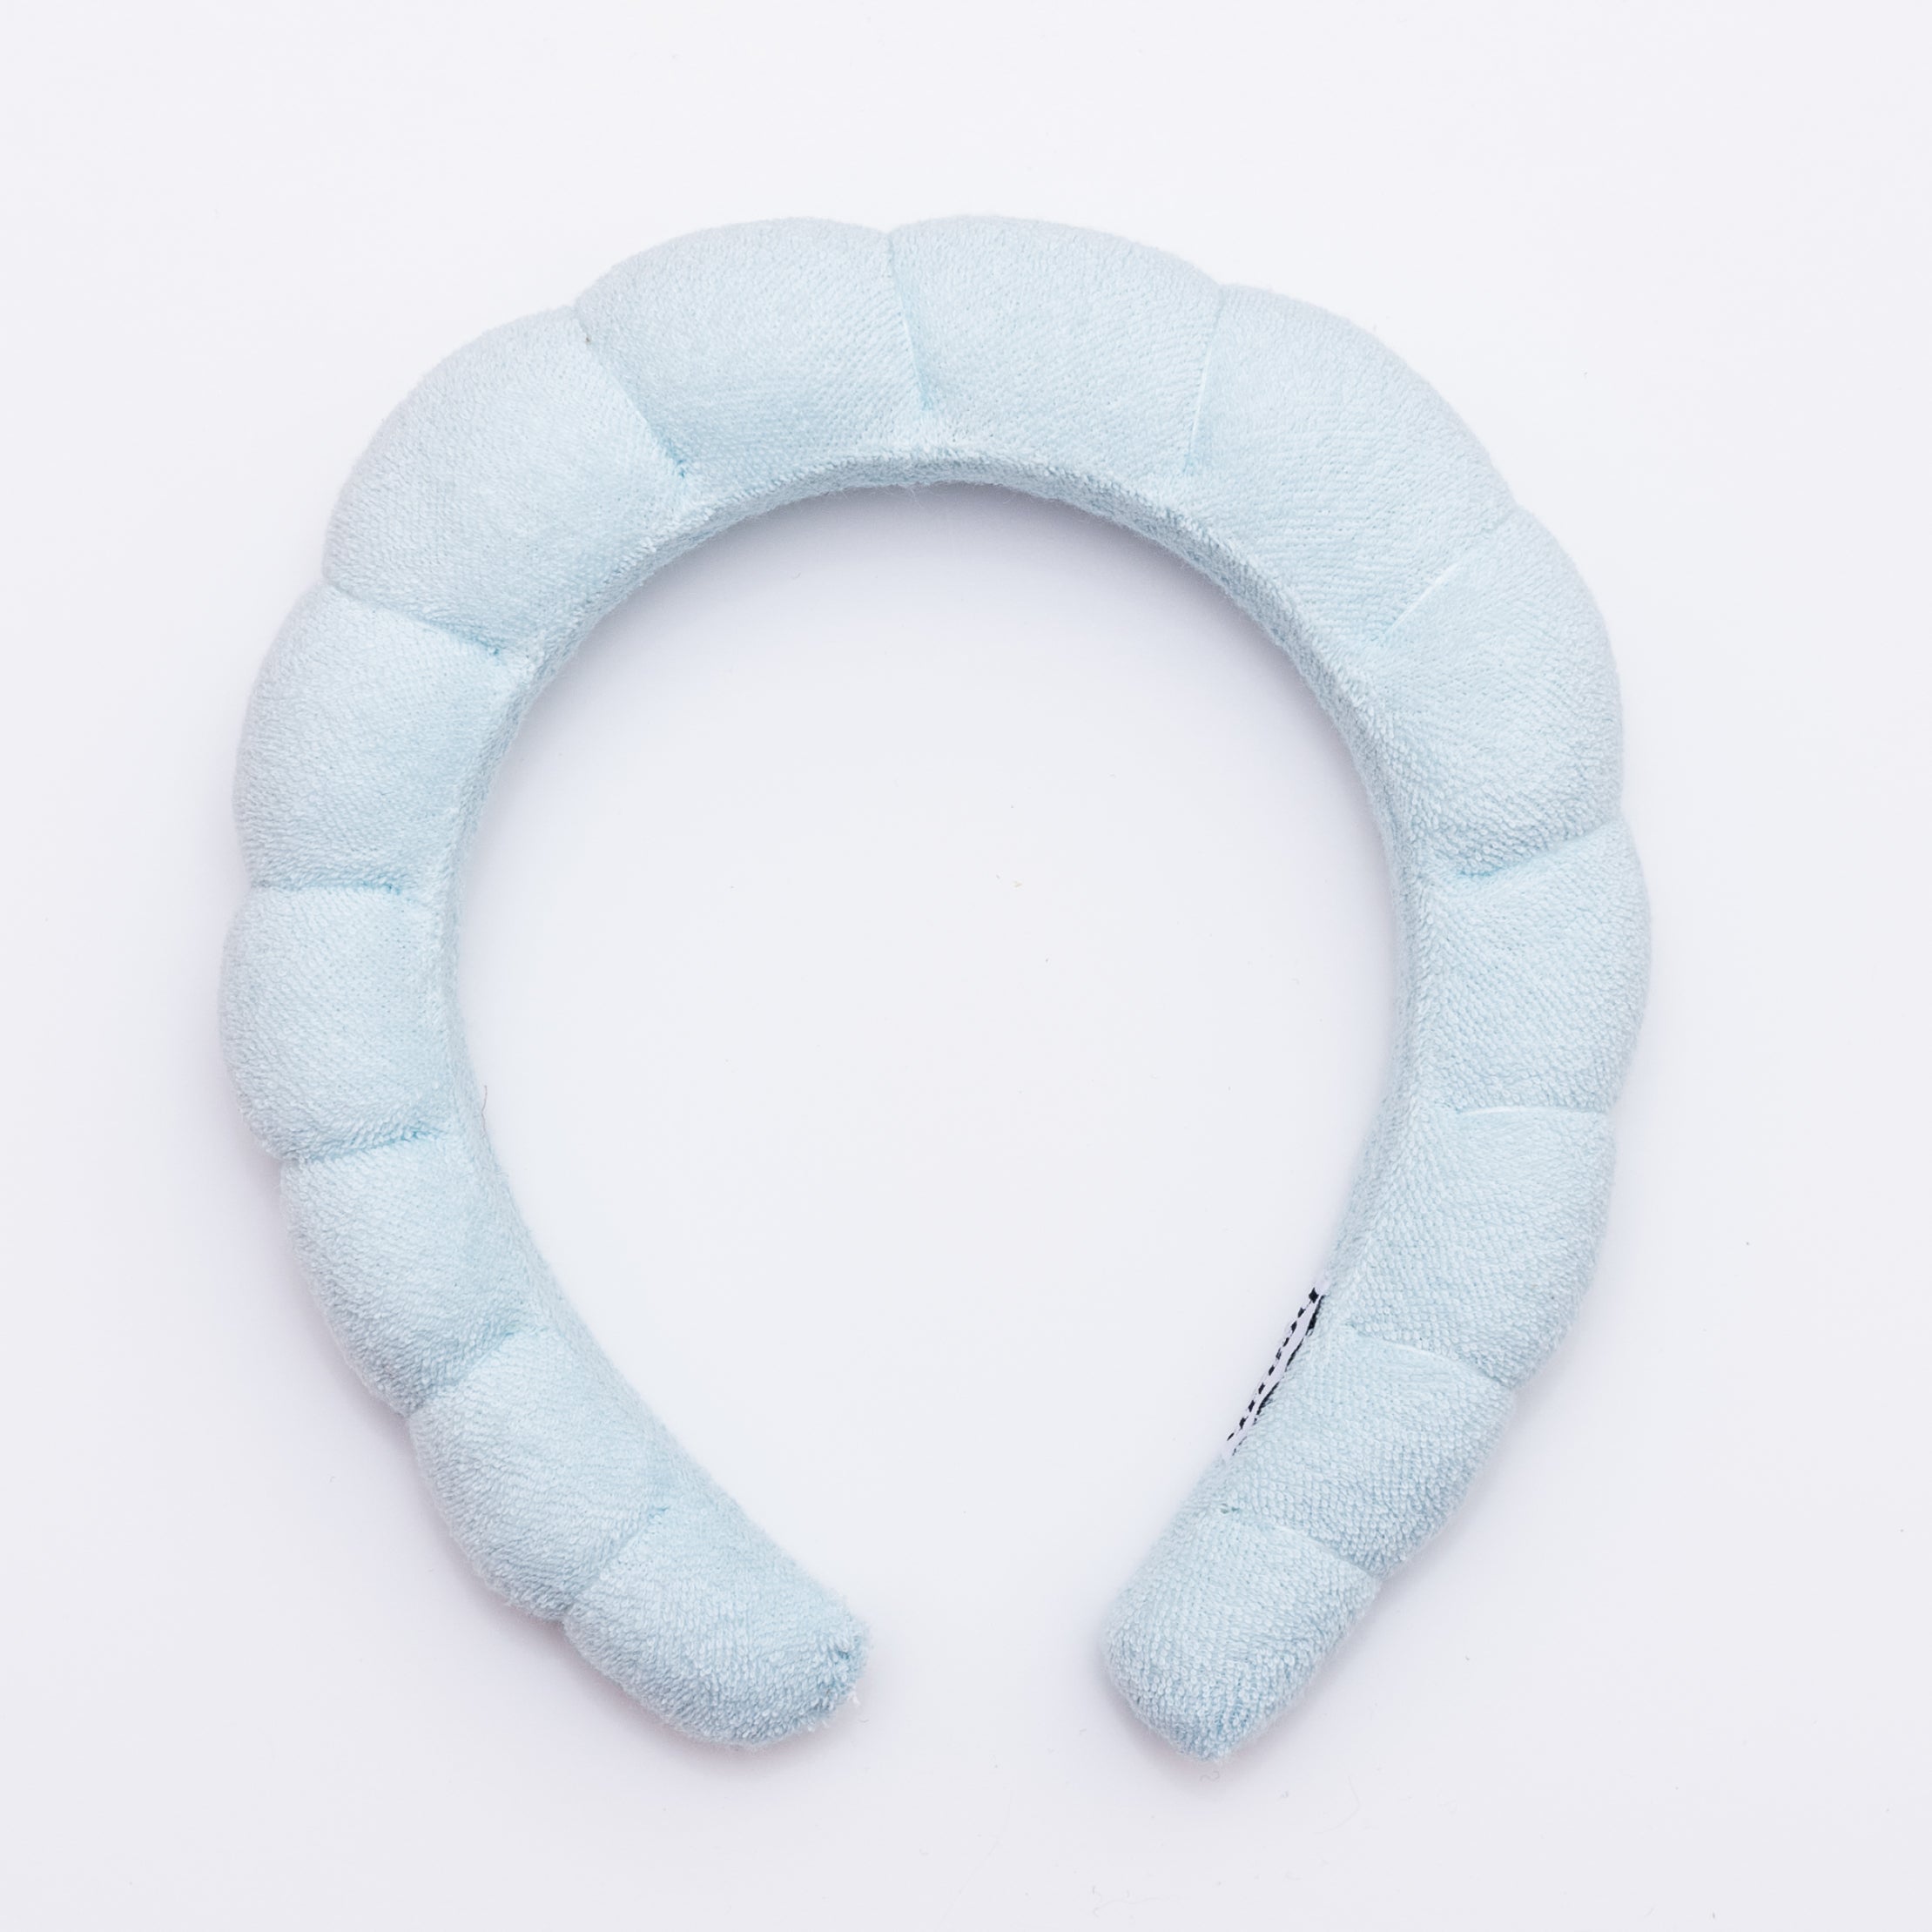 Market Live Preorder: bubble headband + wristbands set by beaut. (Ships in 2-3 Weeks)